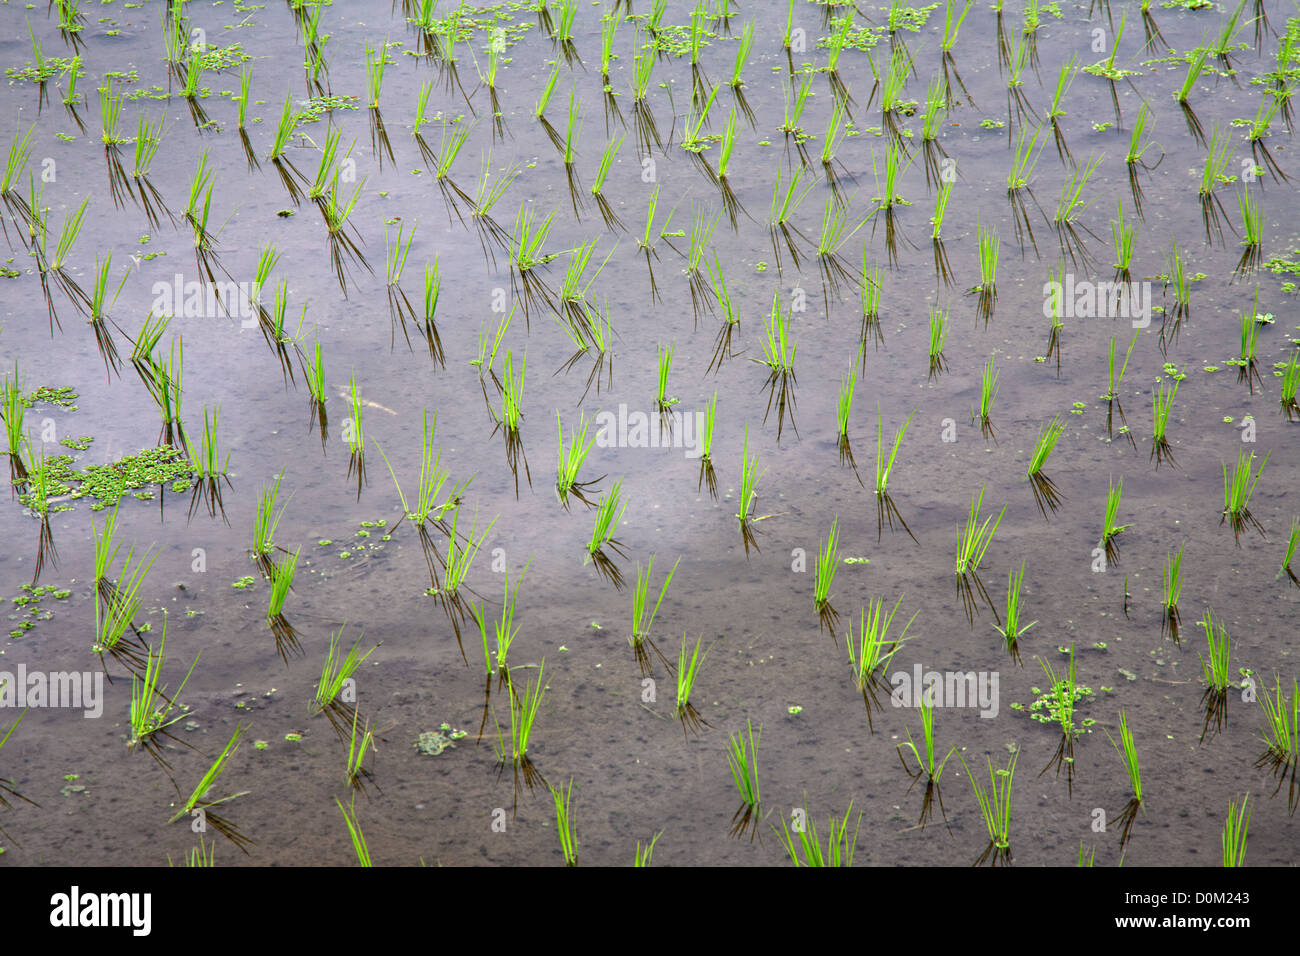 rice seedlings in a water on the paddy field, Bali, Indonesia Stock Photo